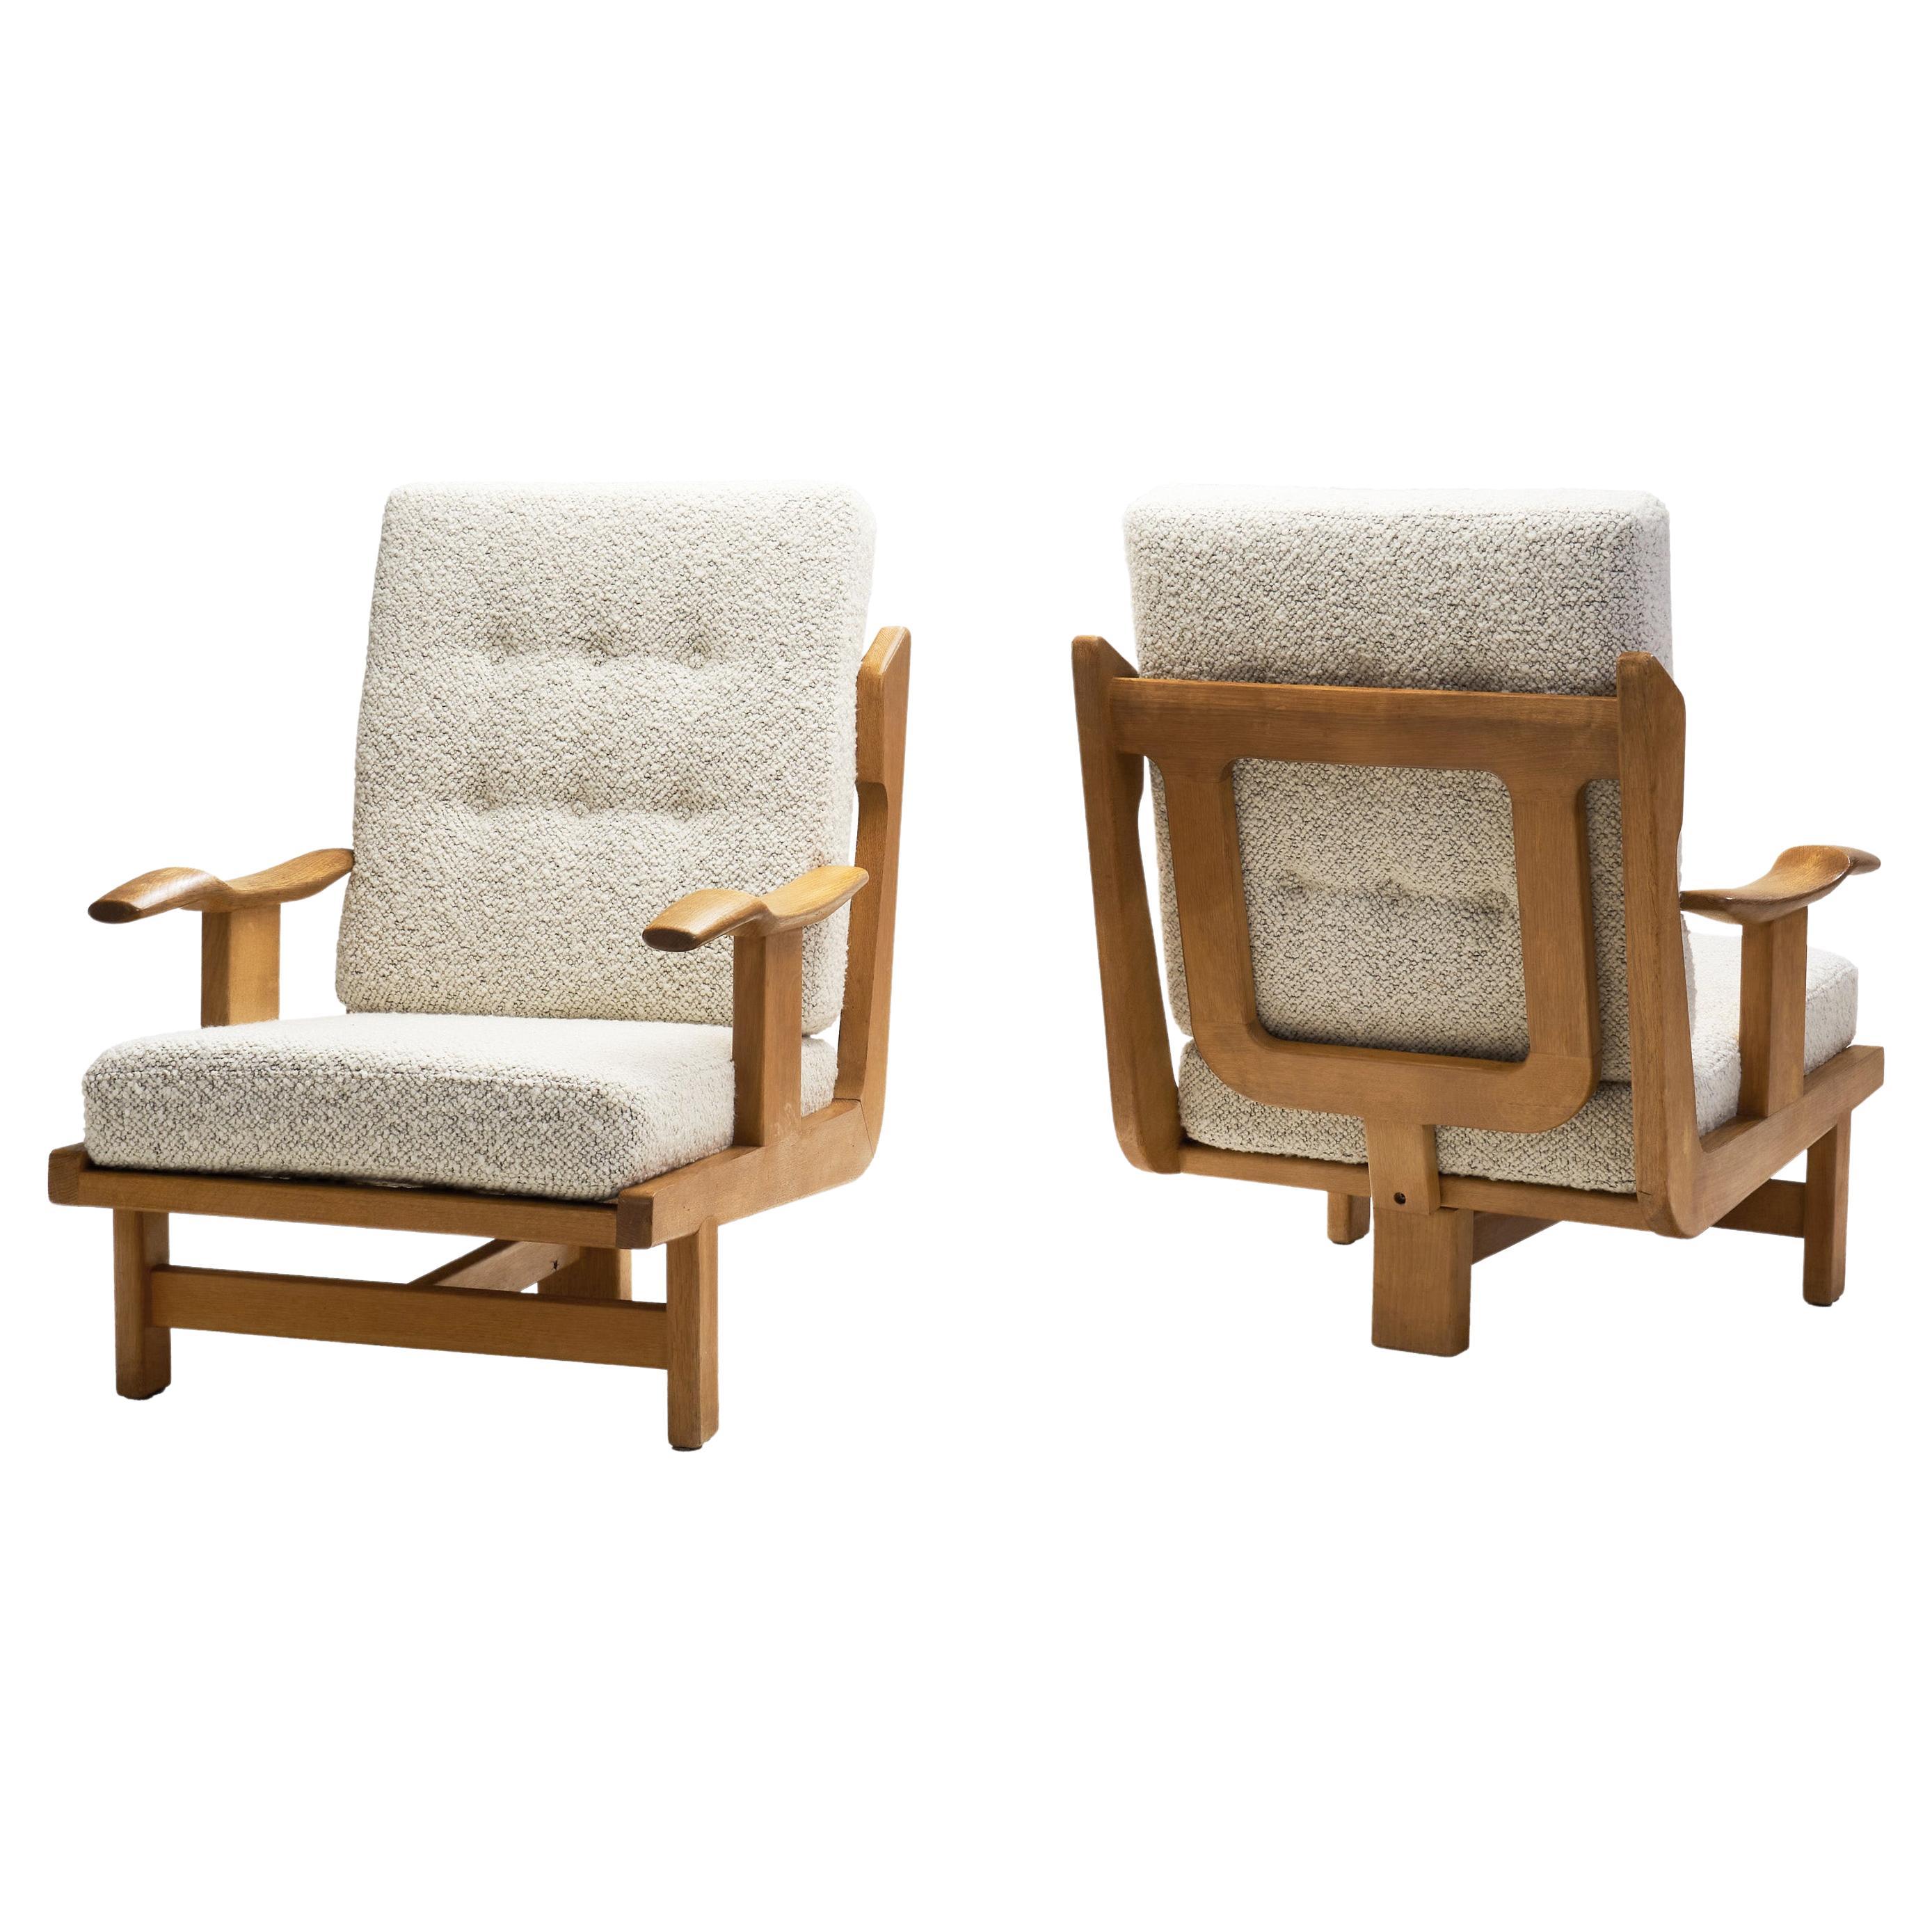 Pair of Tripod Lounge Chairs by Guillerme et Chambron, France 20th Century